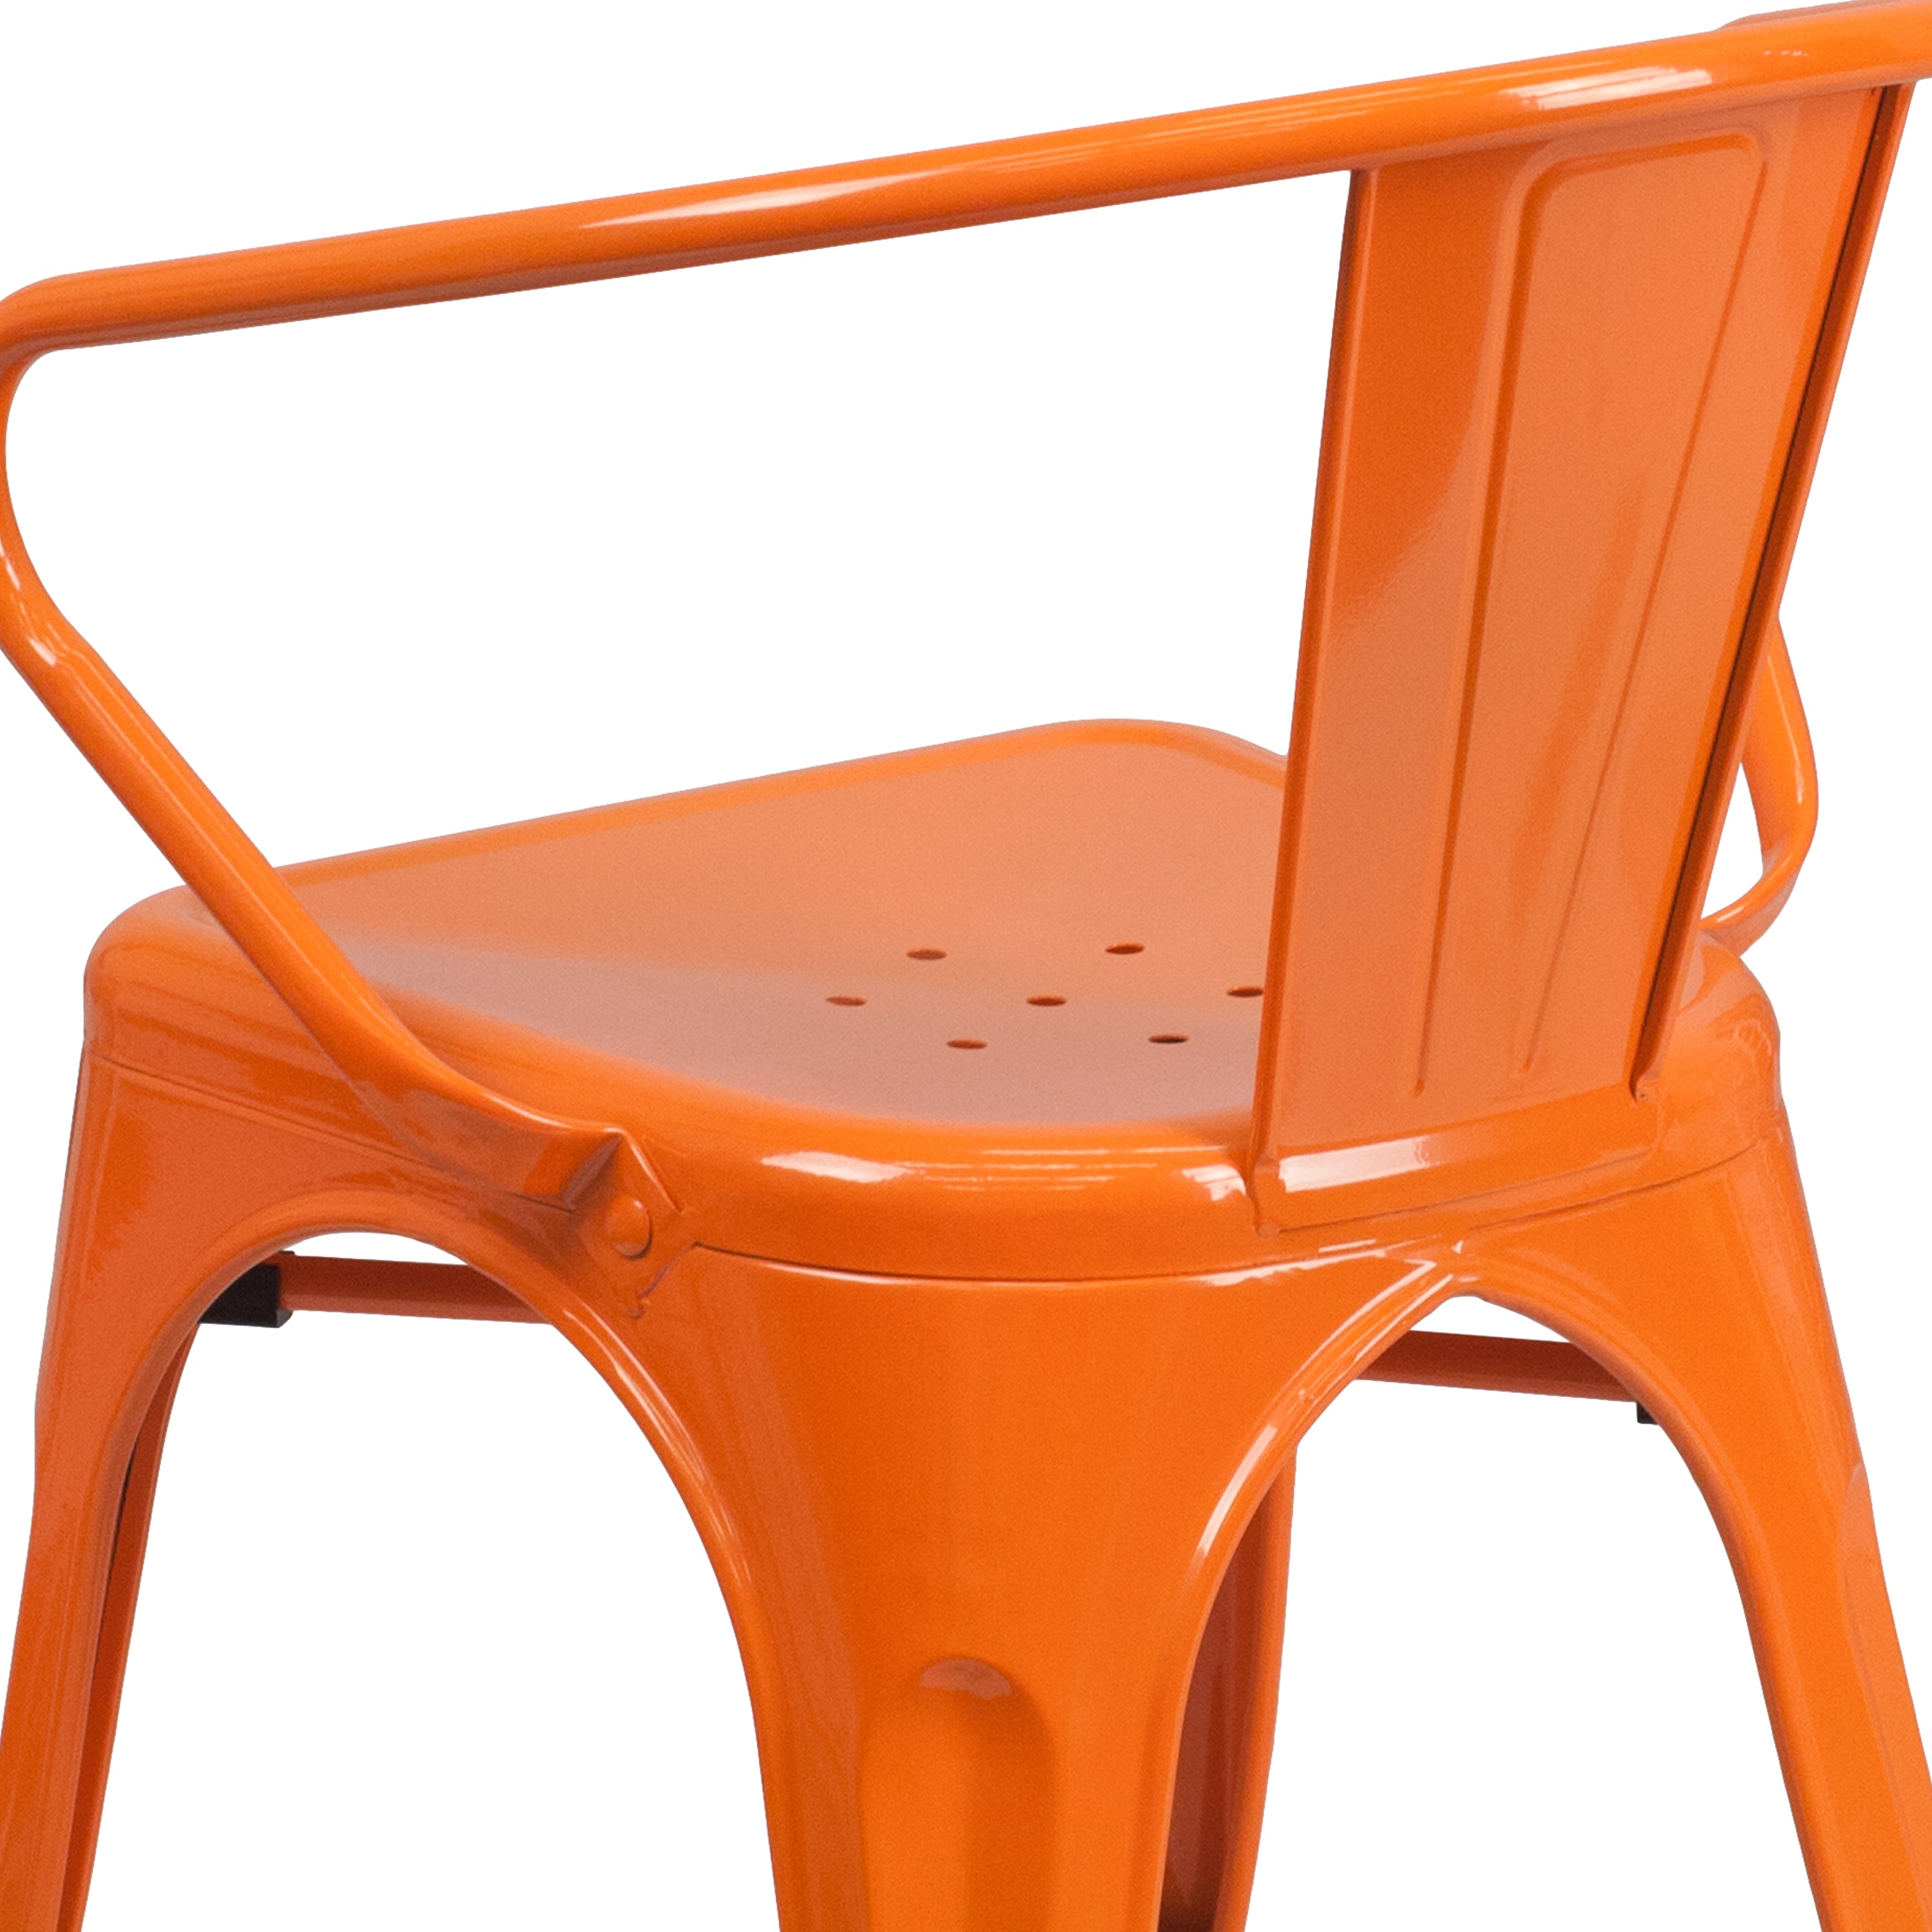 Commercial Grade Metal Indoor-Outdoor Chair with Arms-Indoor/Outdoor Chairs-Flash Furniture-Wall2Wall Furnishings